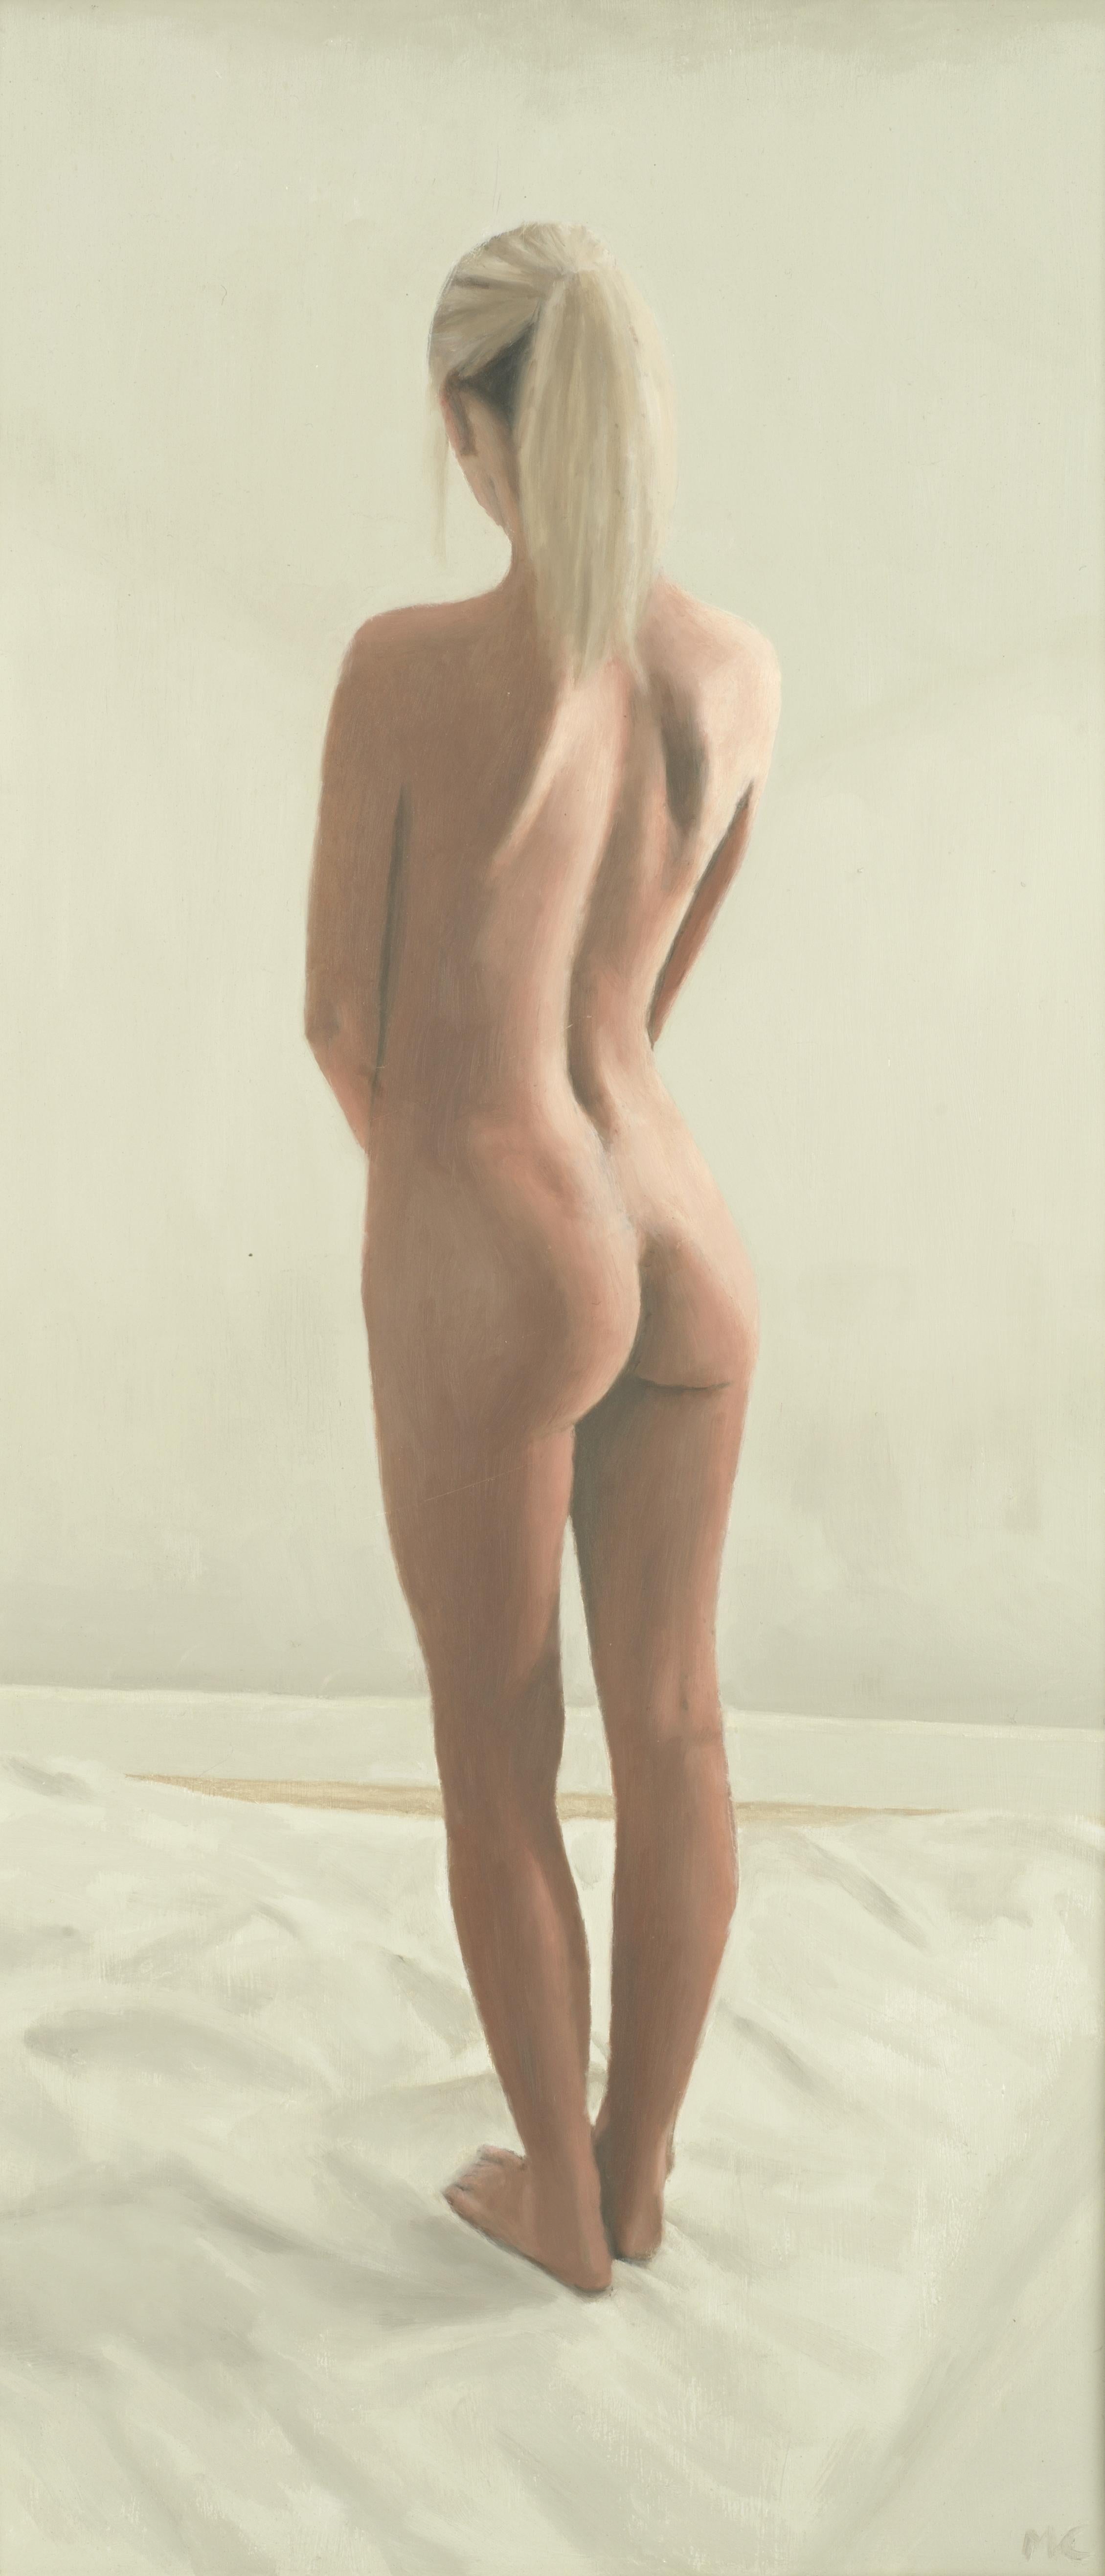 Oil Painting of Standing Female Nude Figure by British Contemporary Artist - Brown Figurative Painting by Mark Clark